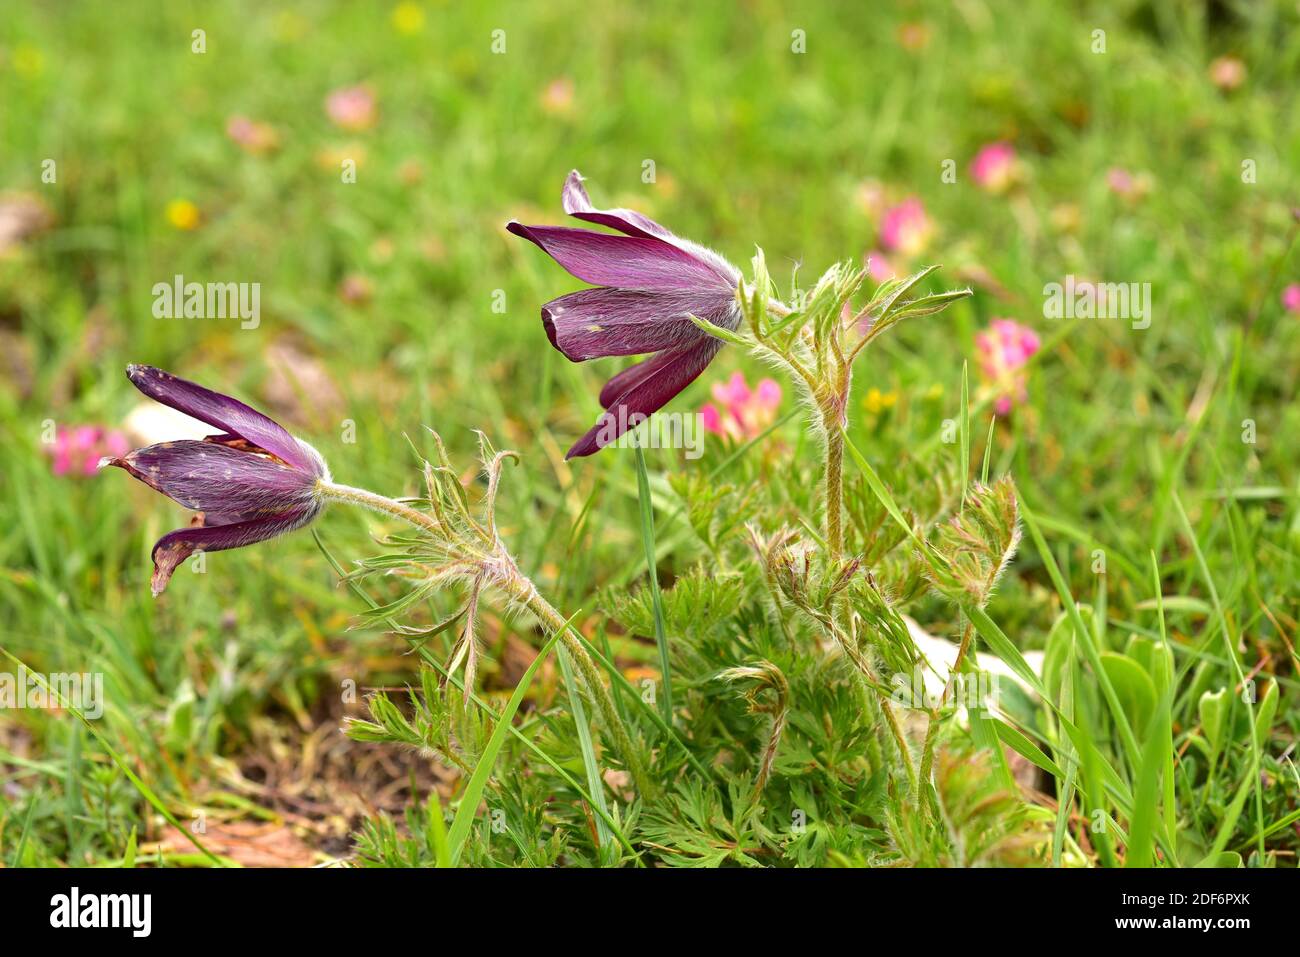 Pasque flower (Pulsatilla vulgaris hispanica or Anemone vulgaris hispanica) is a subspecies endemic to Cantabrian Mountains. This photo was taken in Stock Photo